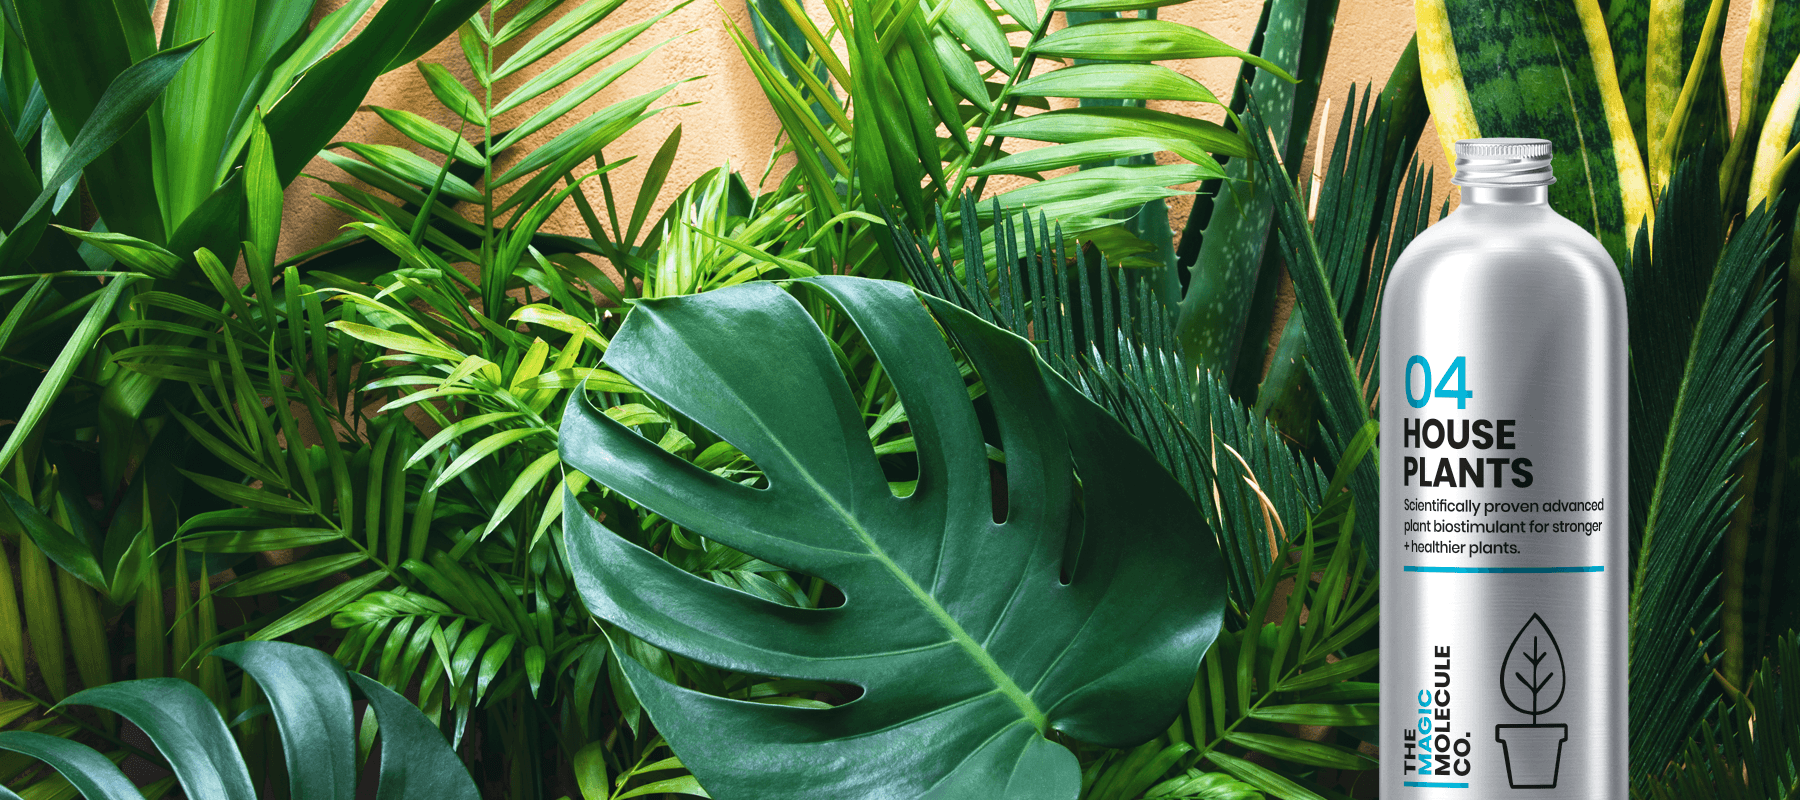 Create your own indoor jungle